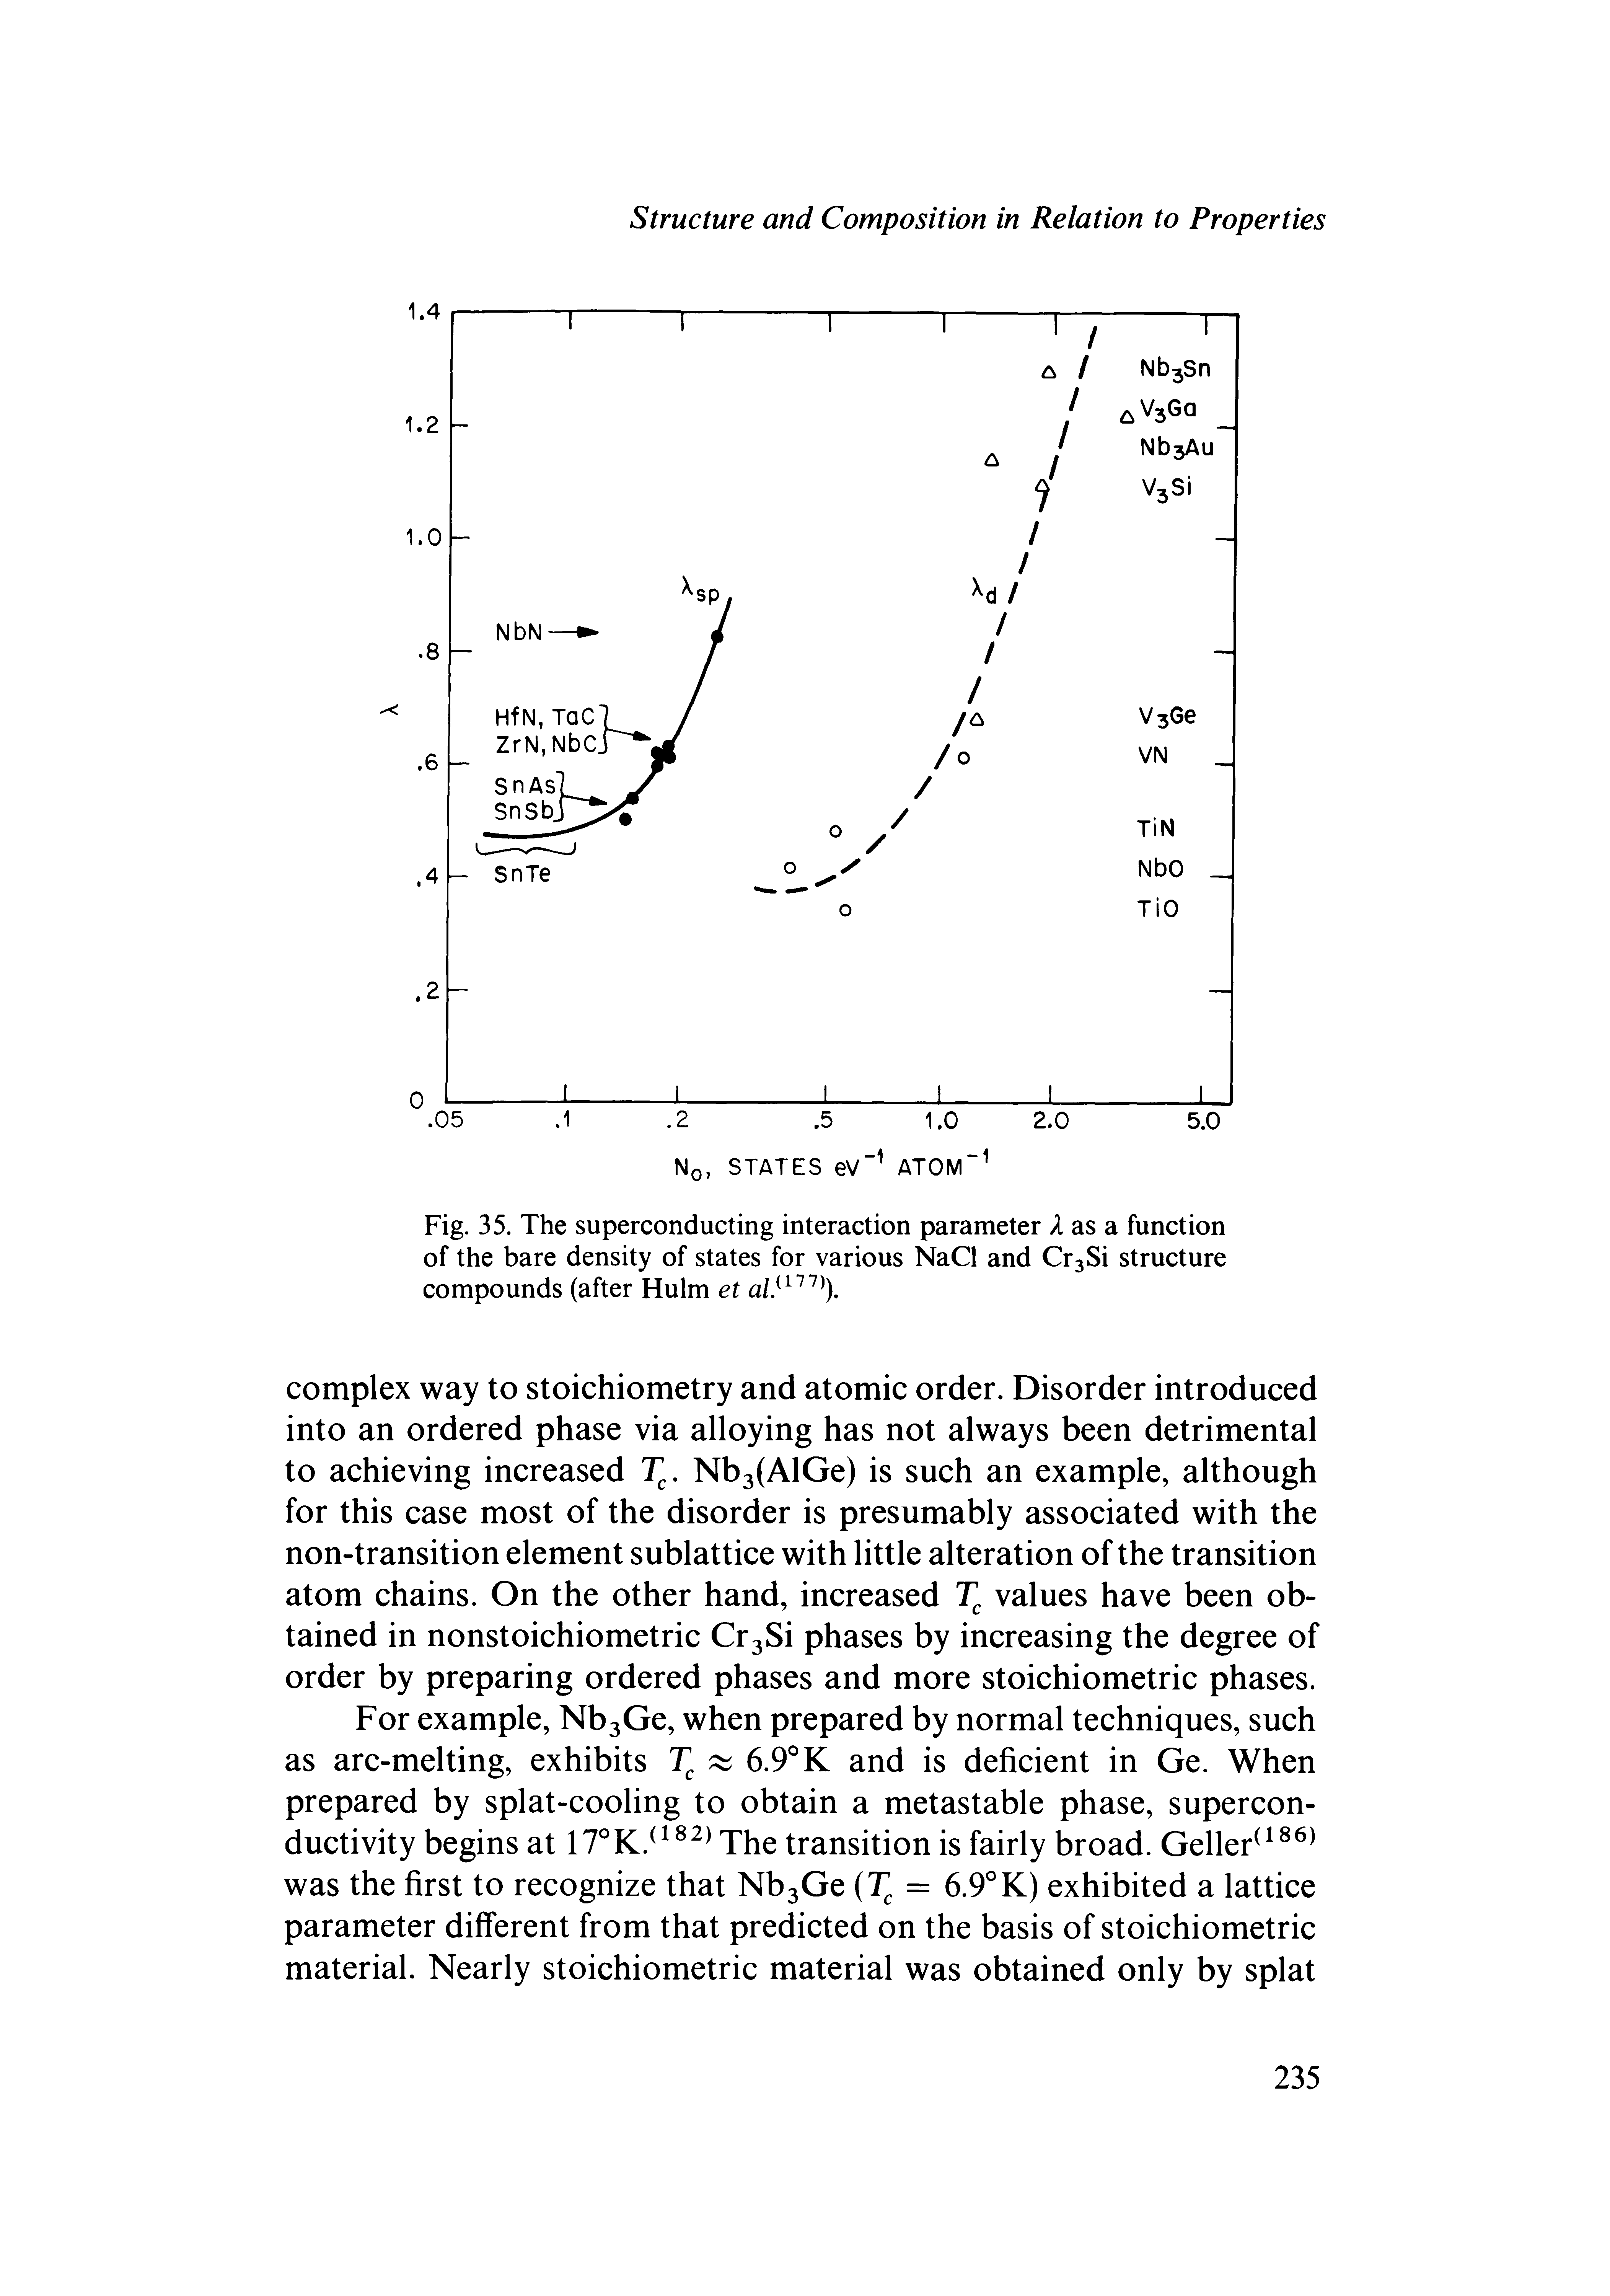 Fig. 35. The superconducting interaction parameter A as a function of the bare density of states for various NaCl and Cr3Si structure compounds (after Hulm et a/. ).